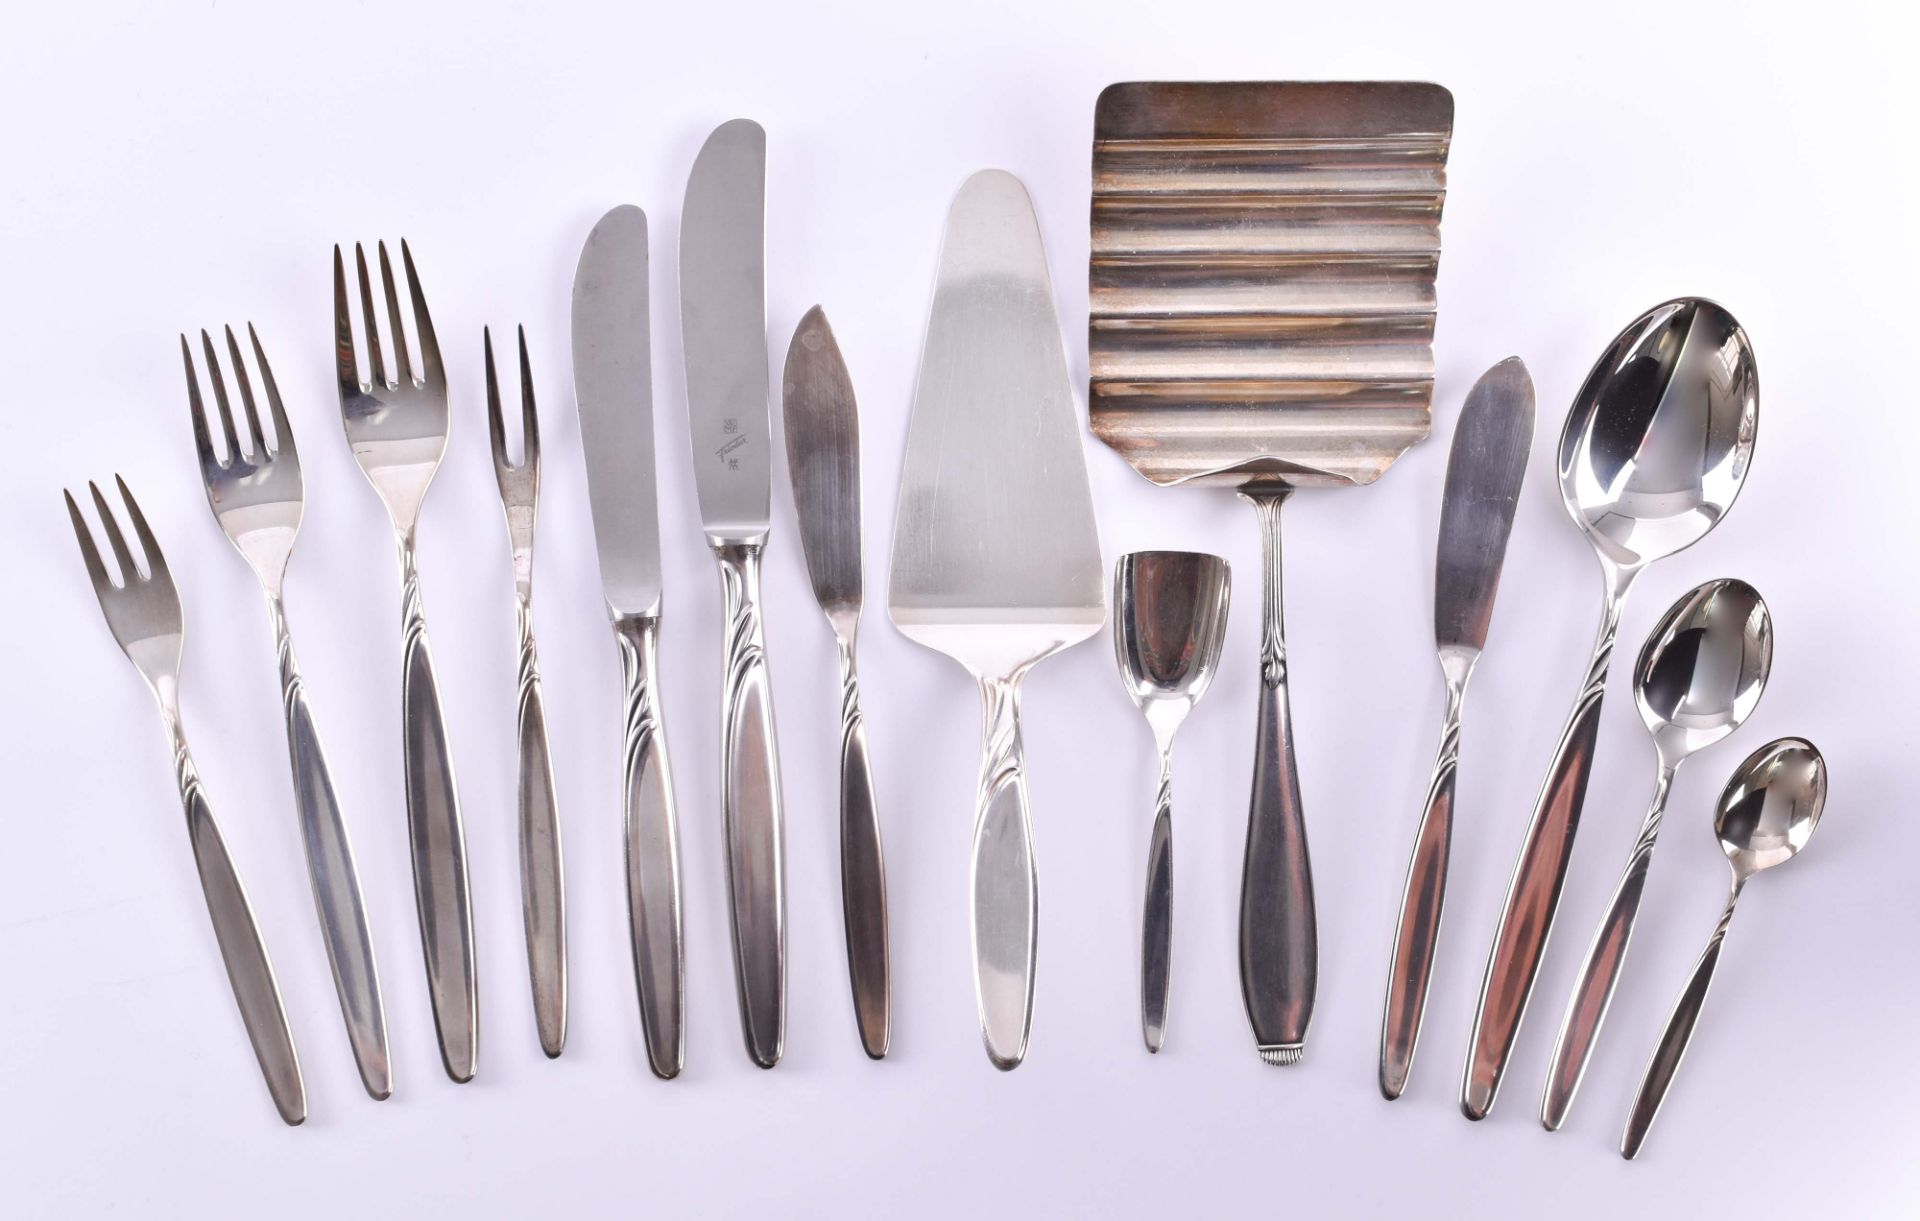 Cutlery WMF85 pieces., 13 knives, 14 forks, 6 large spoons, 18 small forks, 14 teaspoons, 12 mocha